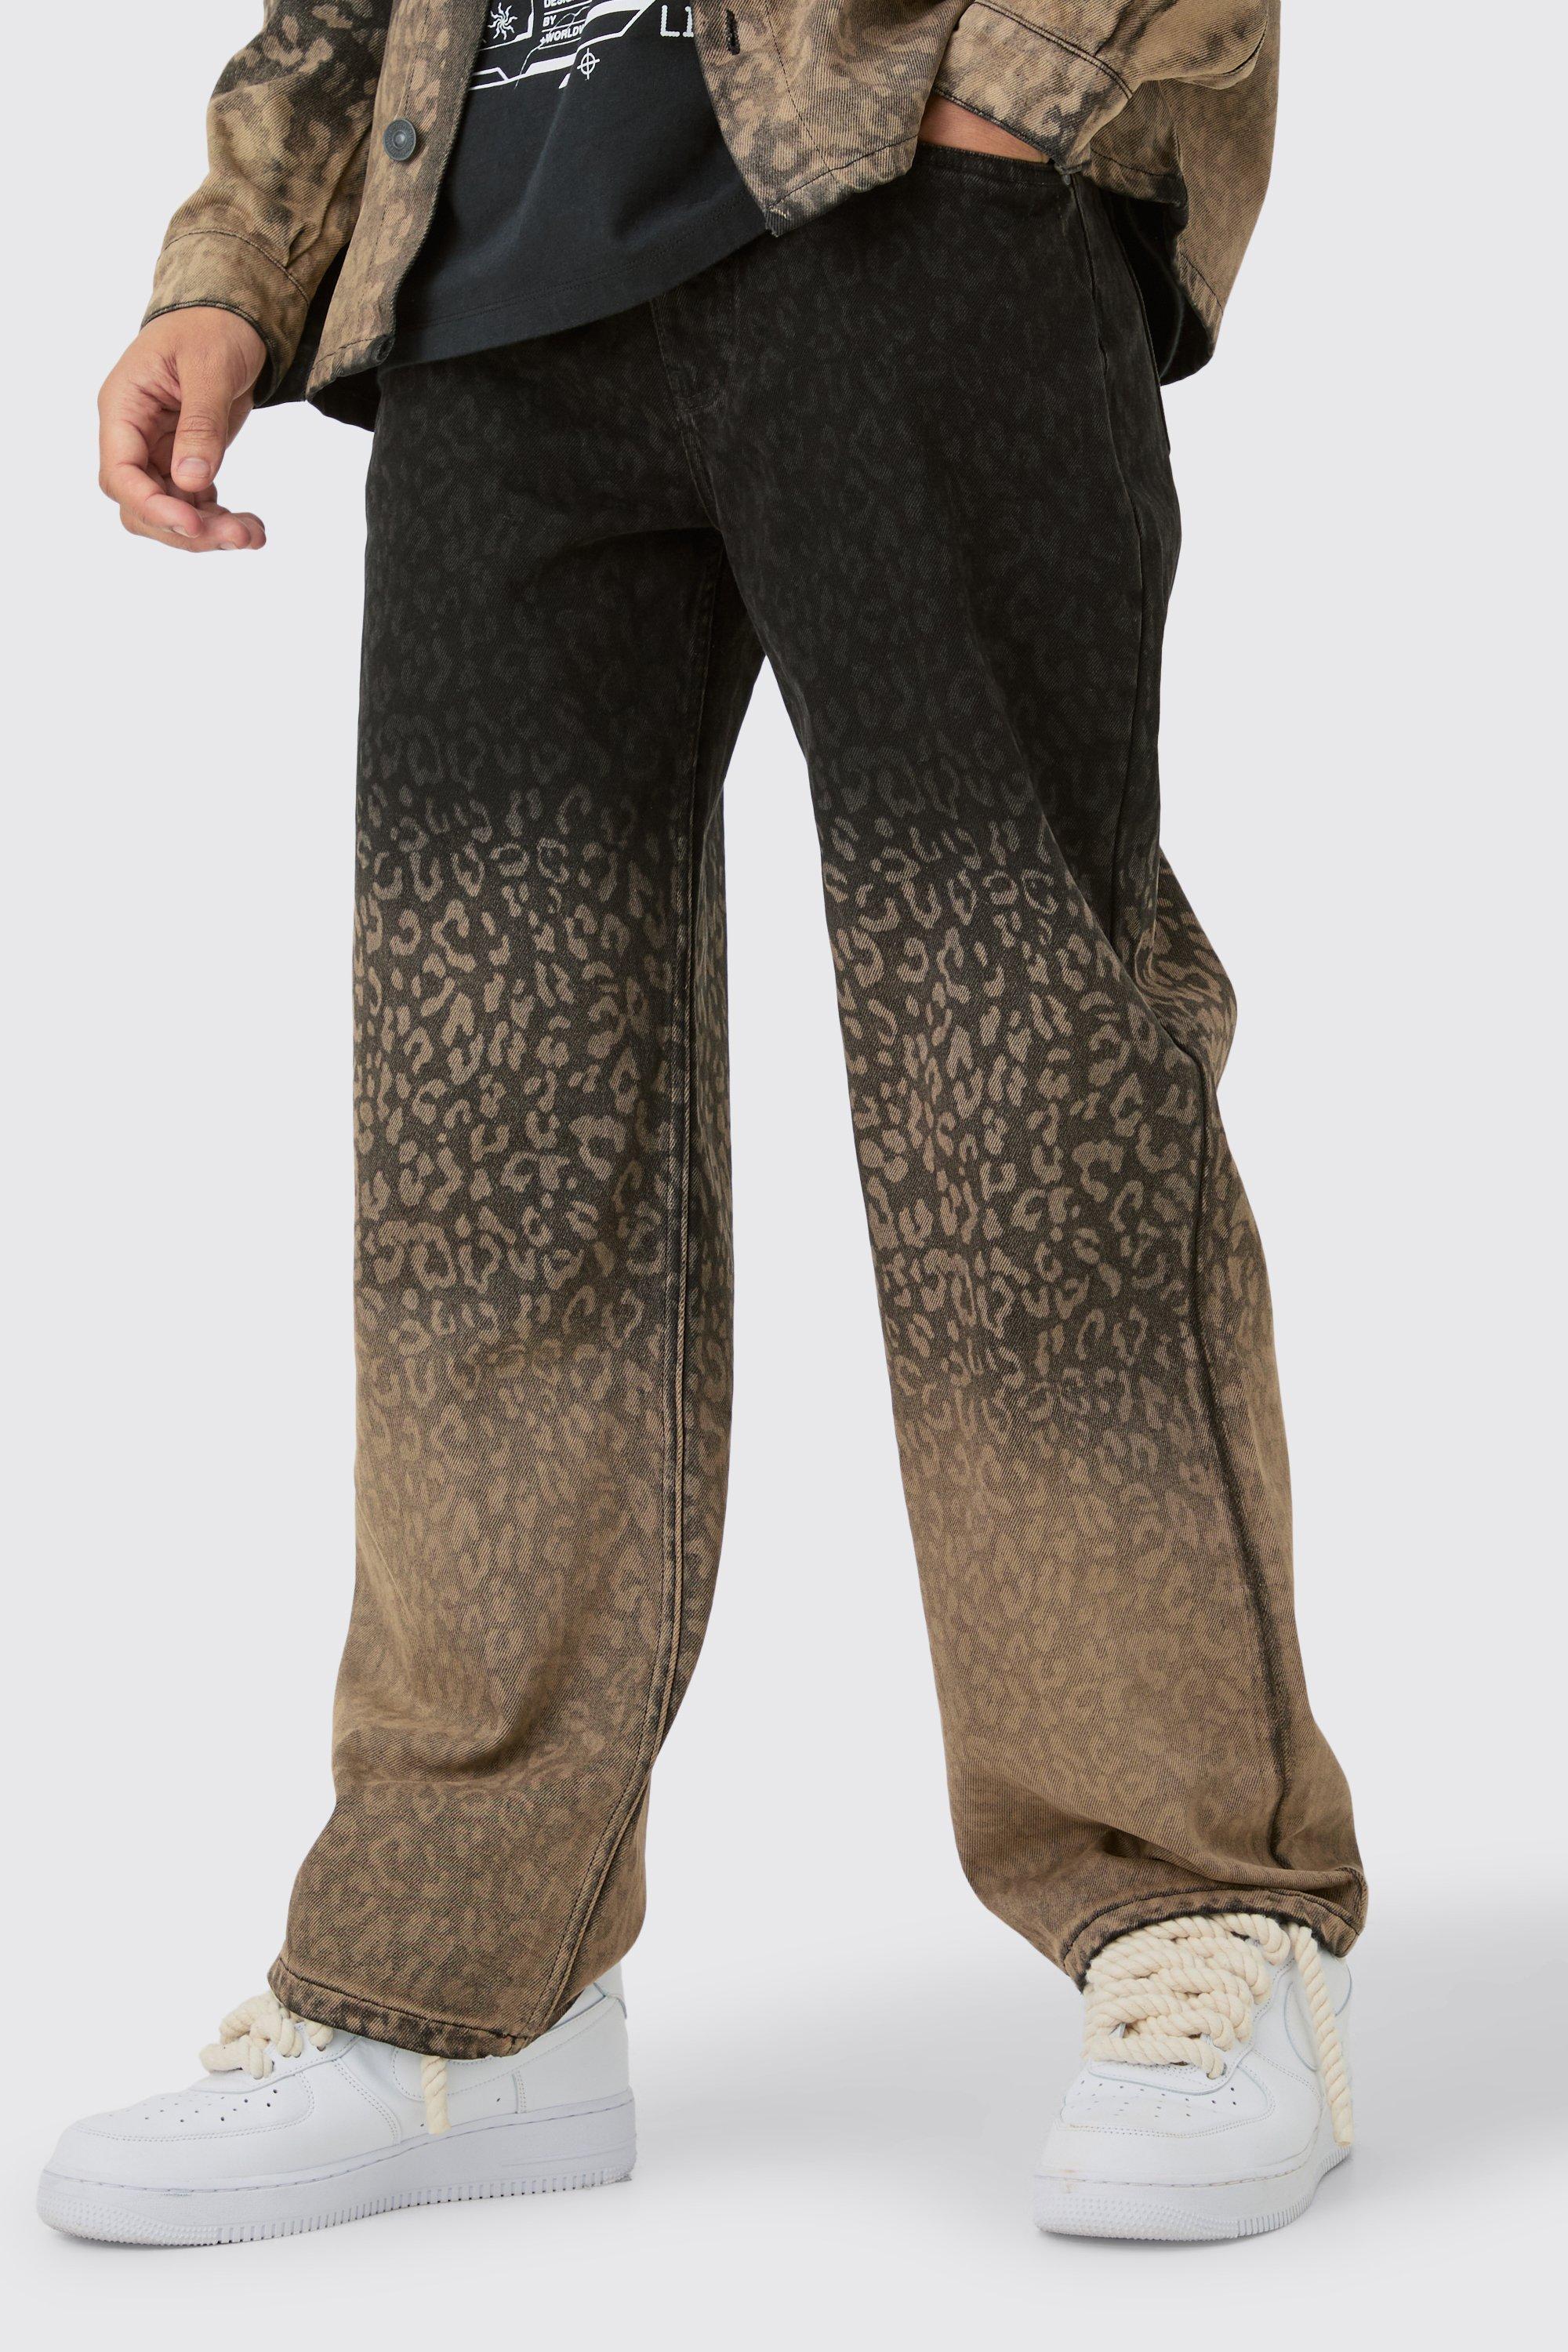 Image of Baggy Rigid Leopard Print Jeans In Tinted Black, Nero